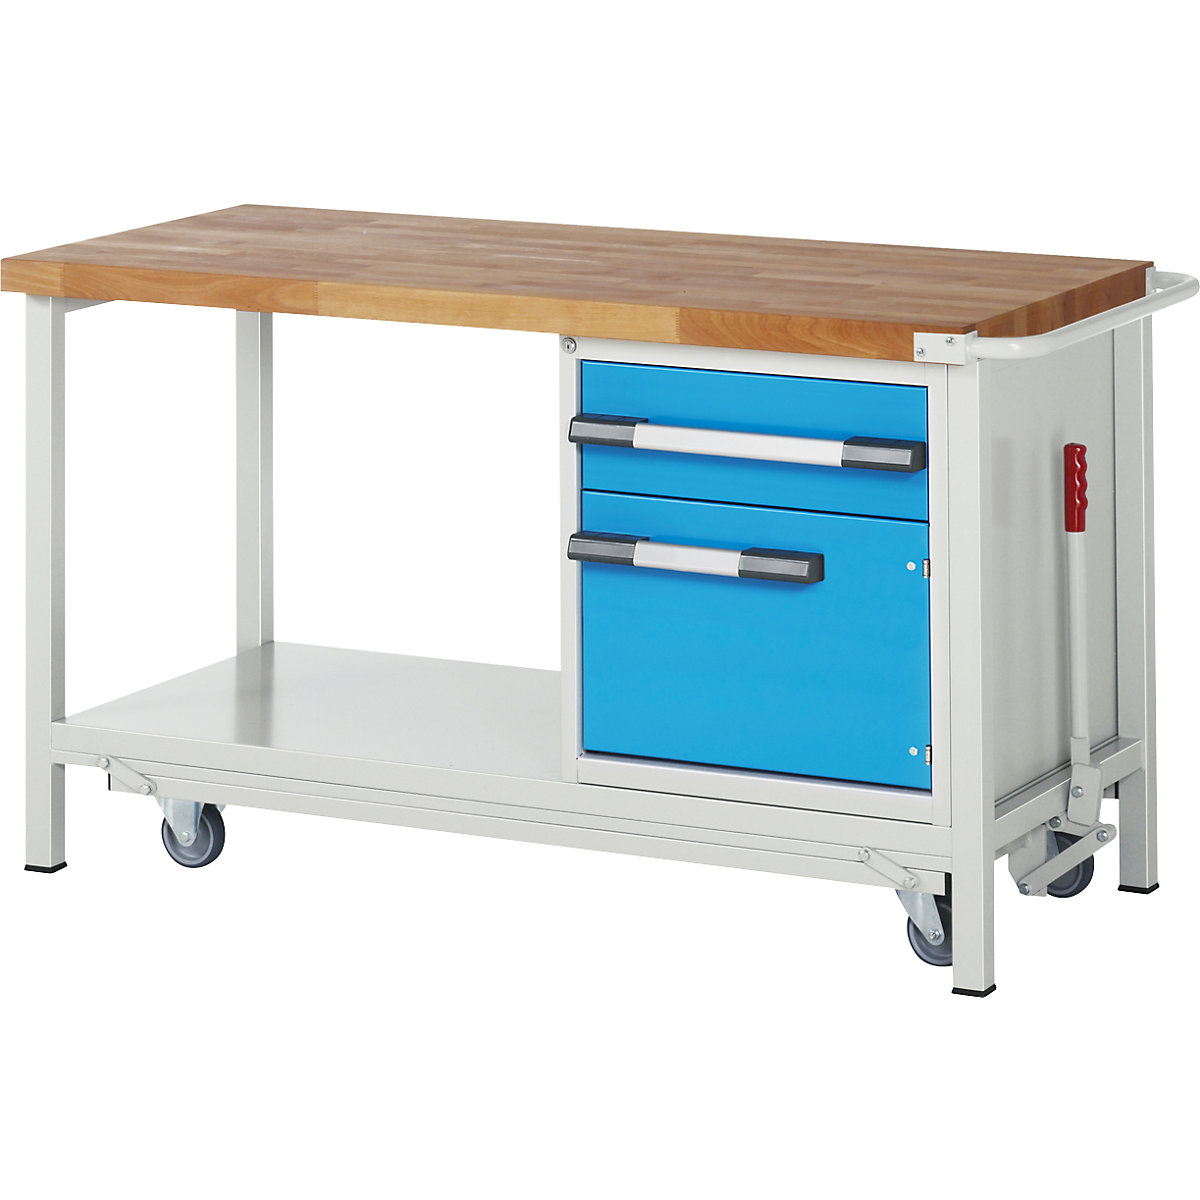 Mobile and lowerable workbench, Series 8 frame construction – eurokraft pro, 1 drawer, 1 door, storage shelf, WxD 1500 x 700 mm-2